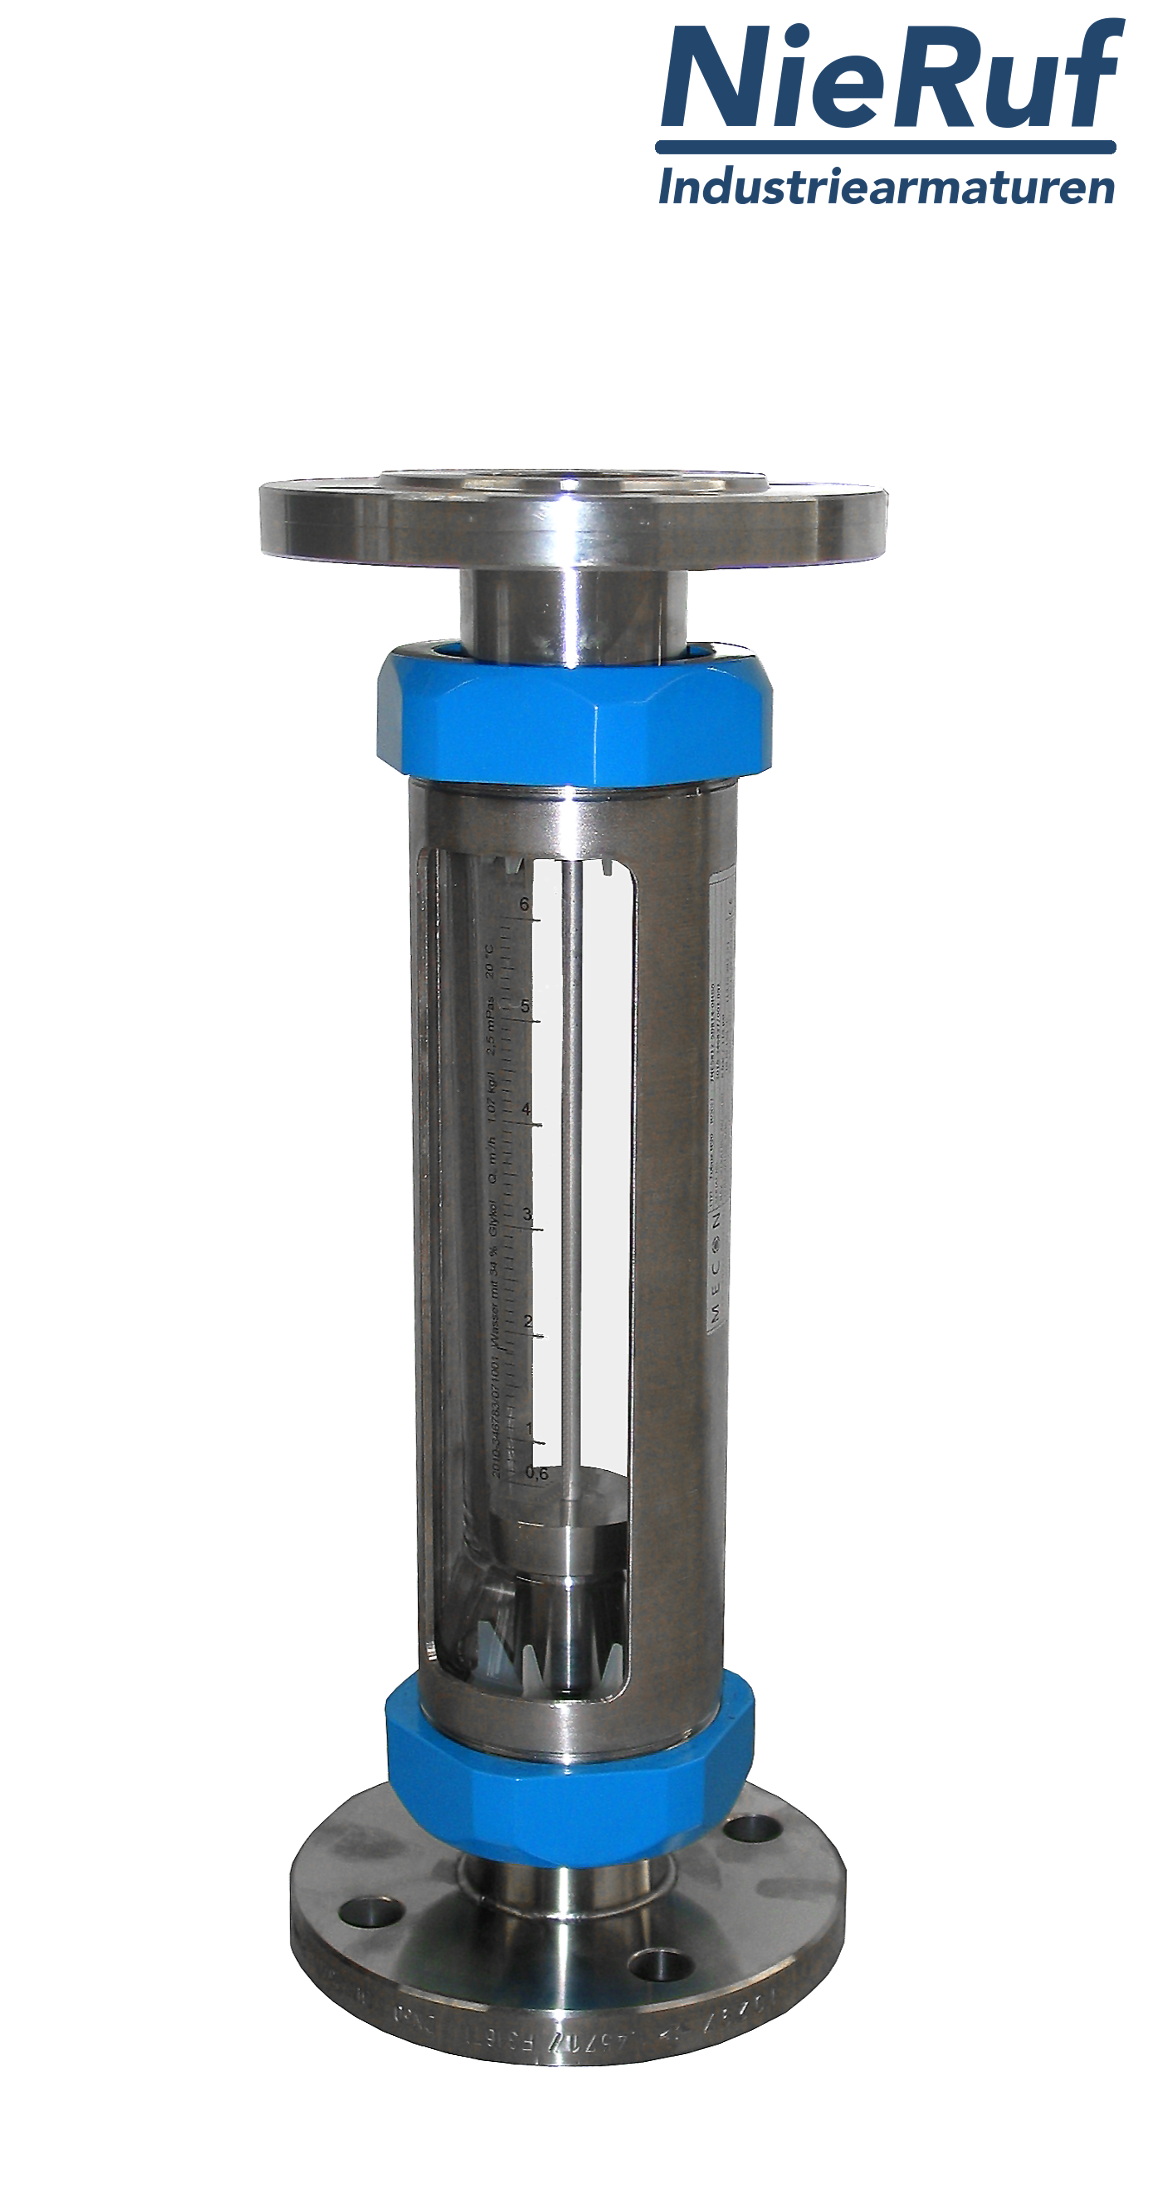 Variable area flowmeter stainless steel + borosilicate flange DN50 400.0 - 4000 l/h water FKM